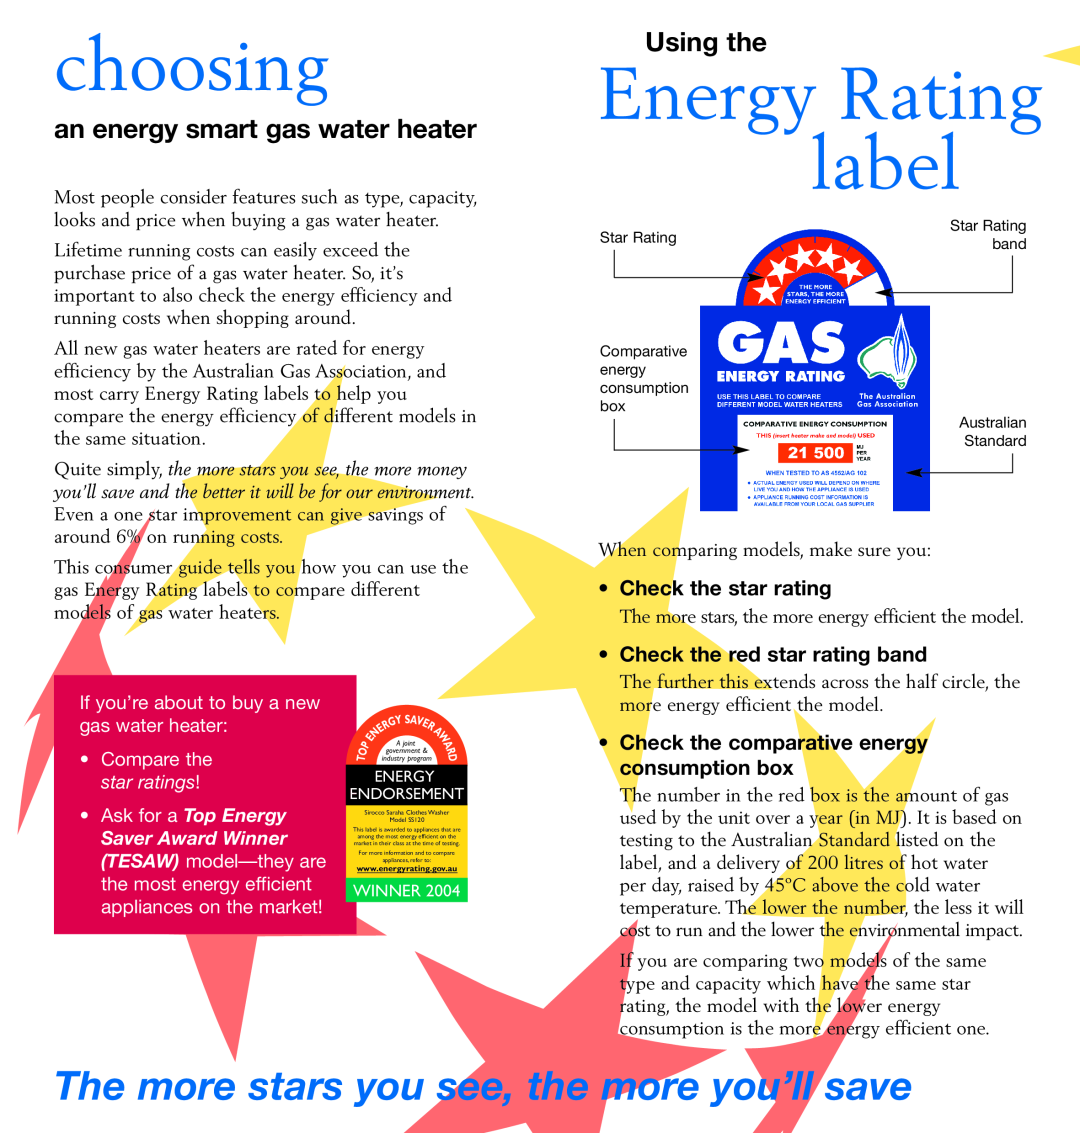 Energy Tech Laboratories SS120 brochure choosing, an energy smart gas water heater, Using the, Check the star rating 